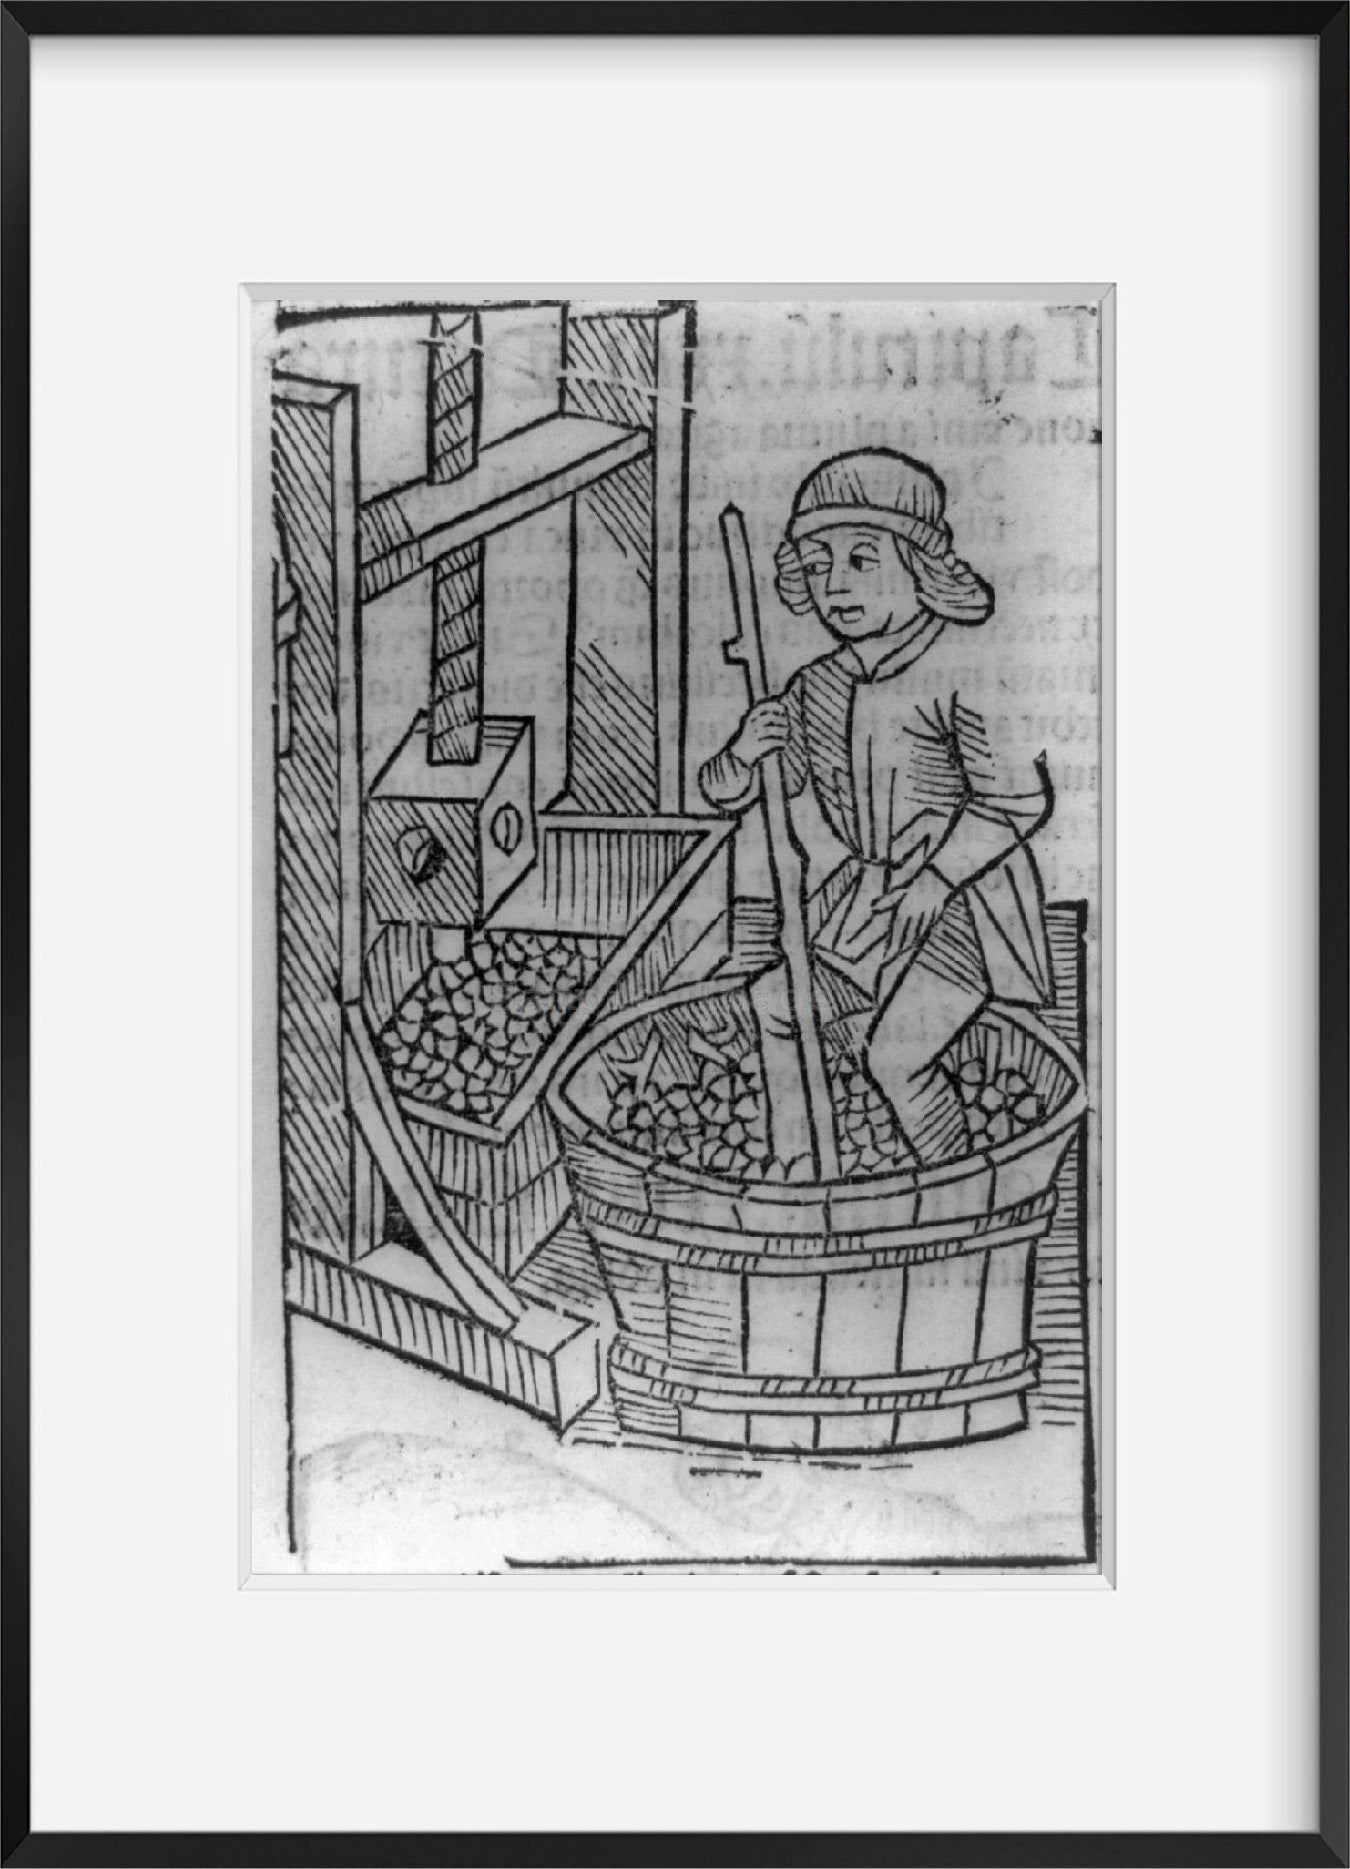 Vintage 1493 print: Viticultural scenes - man crushing grapes in vat with his fe